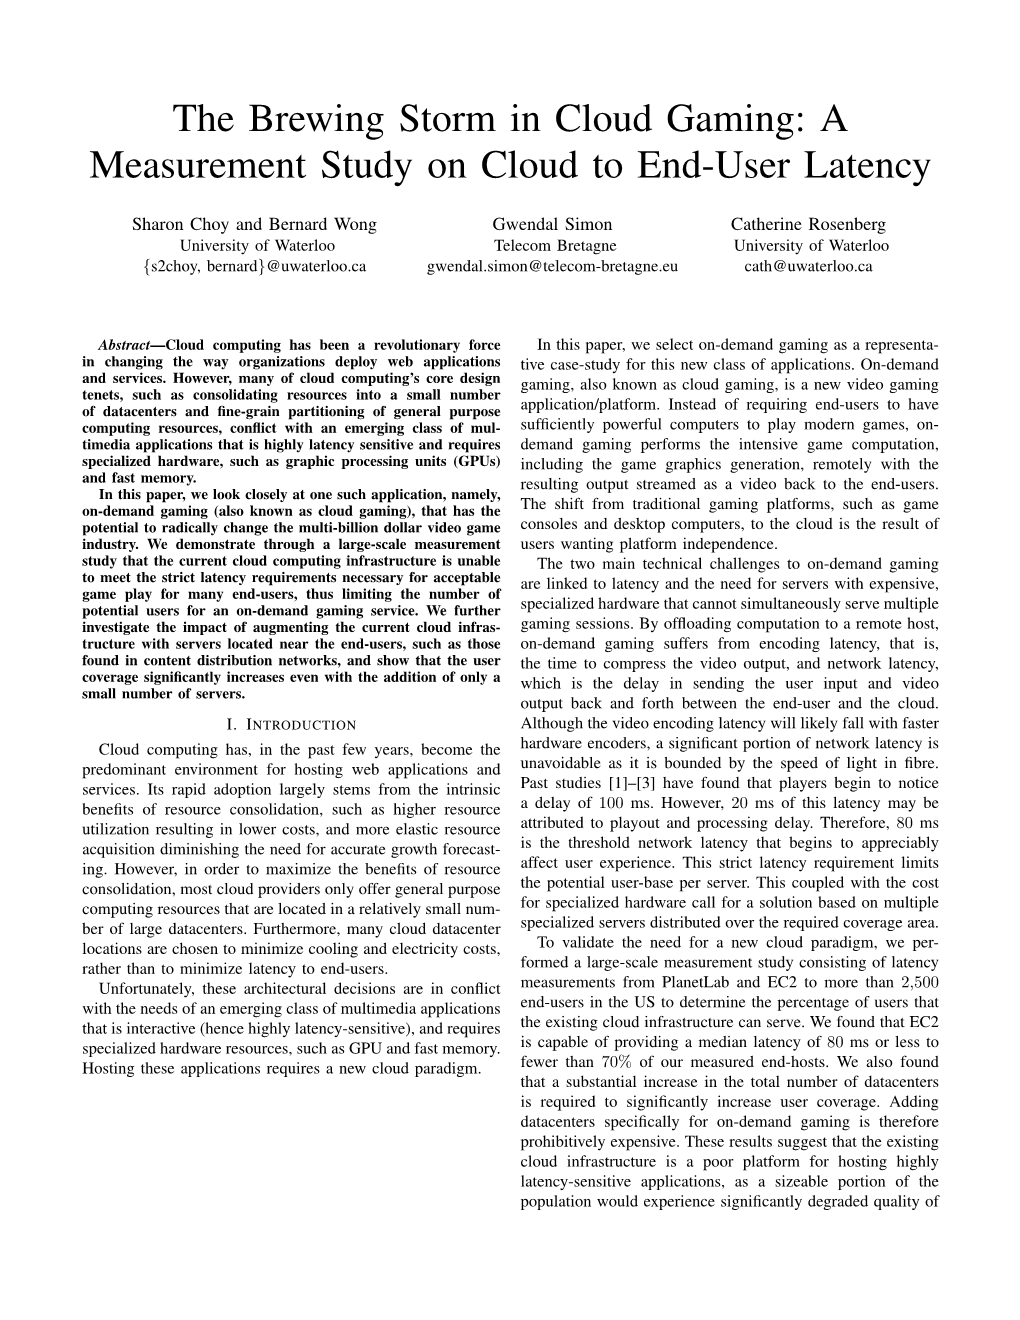 A Measurement Study on Cloud to End-User Latency